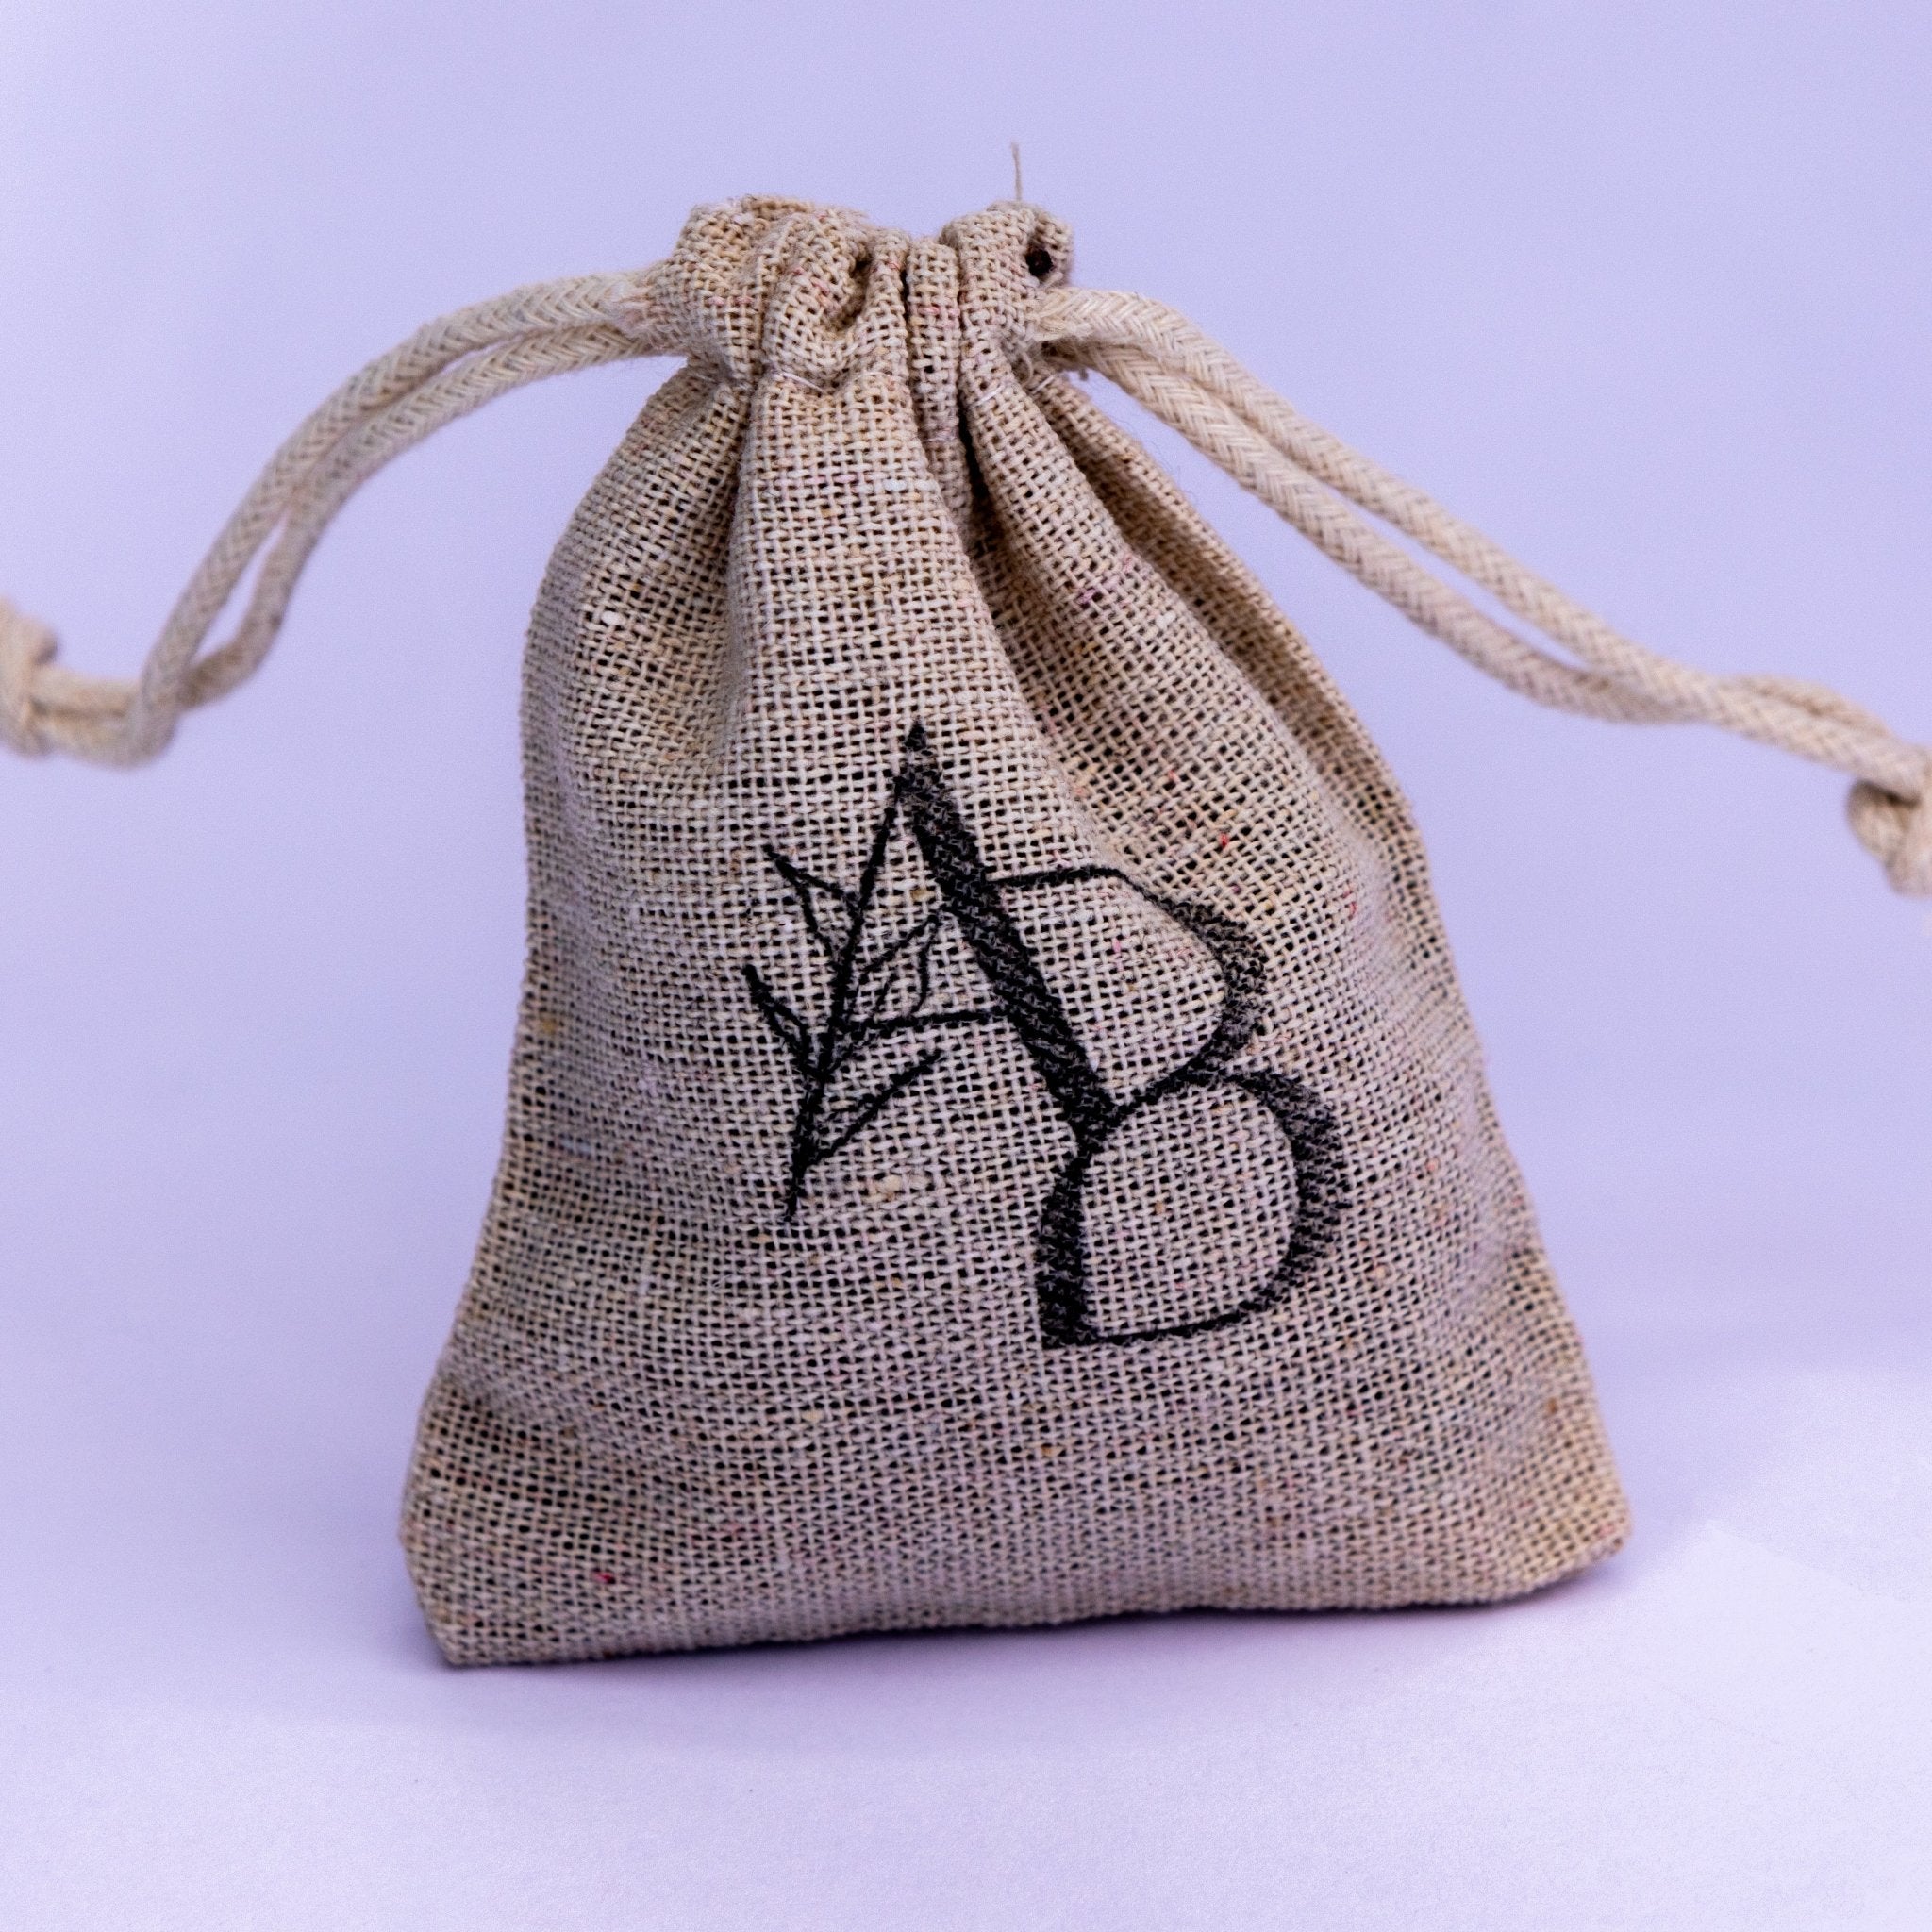 Dried Lavender Bag using an Eco Friendly Cotton.